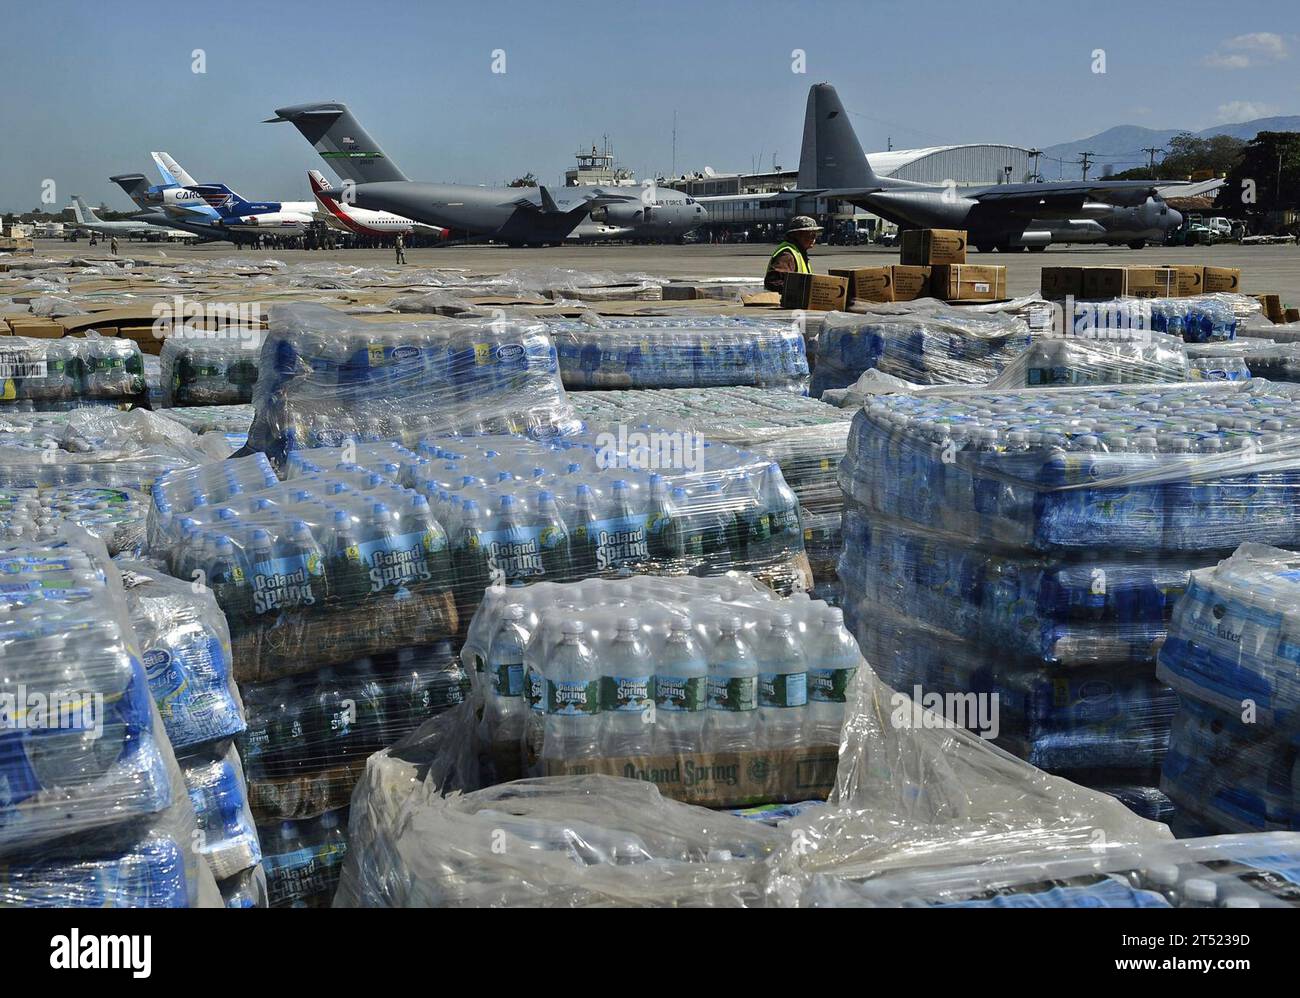 1001285345W-098 PORT-AU-PRINCE, Haiti (Jan. 28, 2010) Pallets of humanitarian aid and bottled water are lined up in a staging area just off the tarmac of Aerodome de Jacmel, an airport in Port-au-Prince, while cargo planes from various nations sit at the airport's terminal facility. The multi-purpose amphibious assault ship USS Bataan (LHD 5) and the amphibious dock landing ships USS Fort McHenry (LSD 43), USS Gunston Hall (LSD 44) and USS Carter Hall (LSD 50) are participating in Operation Unified Response as the Bataan Amphibious Relief Mission by providing military support capabilities to c Stock Photo